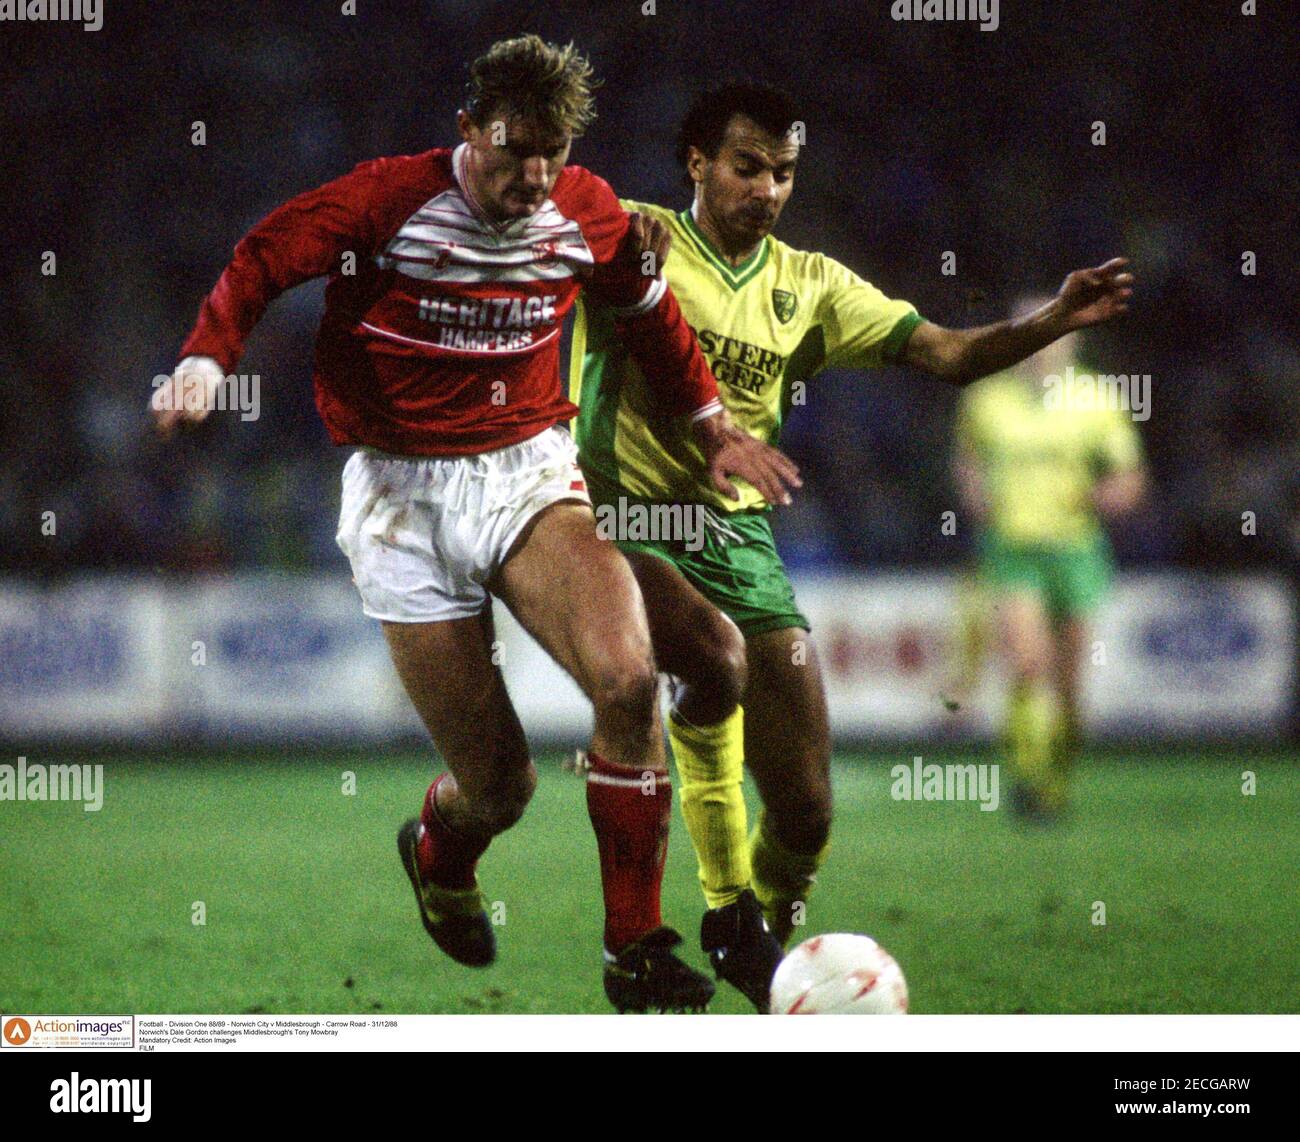 Football - Division One 88/89 - Norwich City v Middlesbrough - Carrow Road - 31/12/88  Norwich's Dale Gordon challenges Middlesbrough's Tony Mowbray  Mandatory Credit: Action Images   FILM Stock Photo